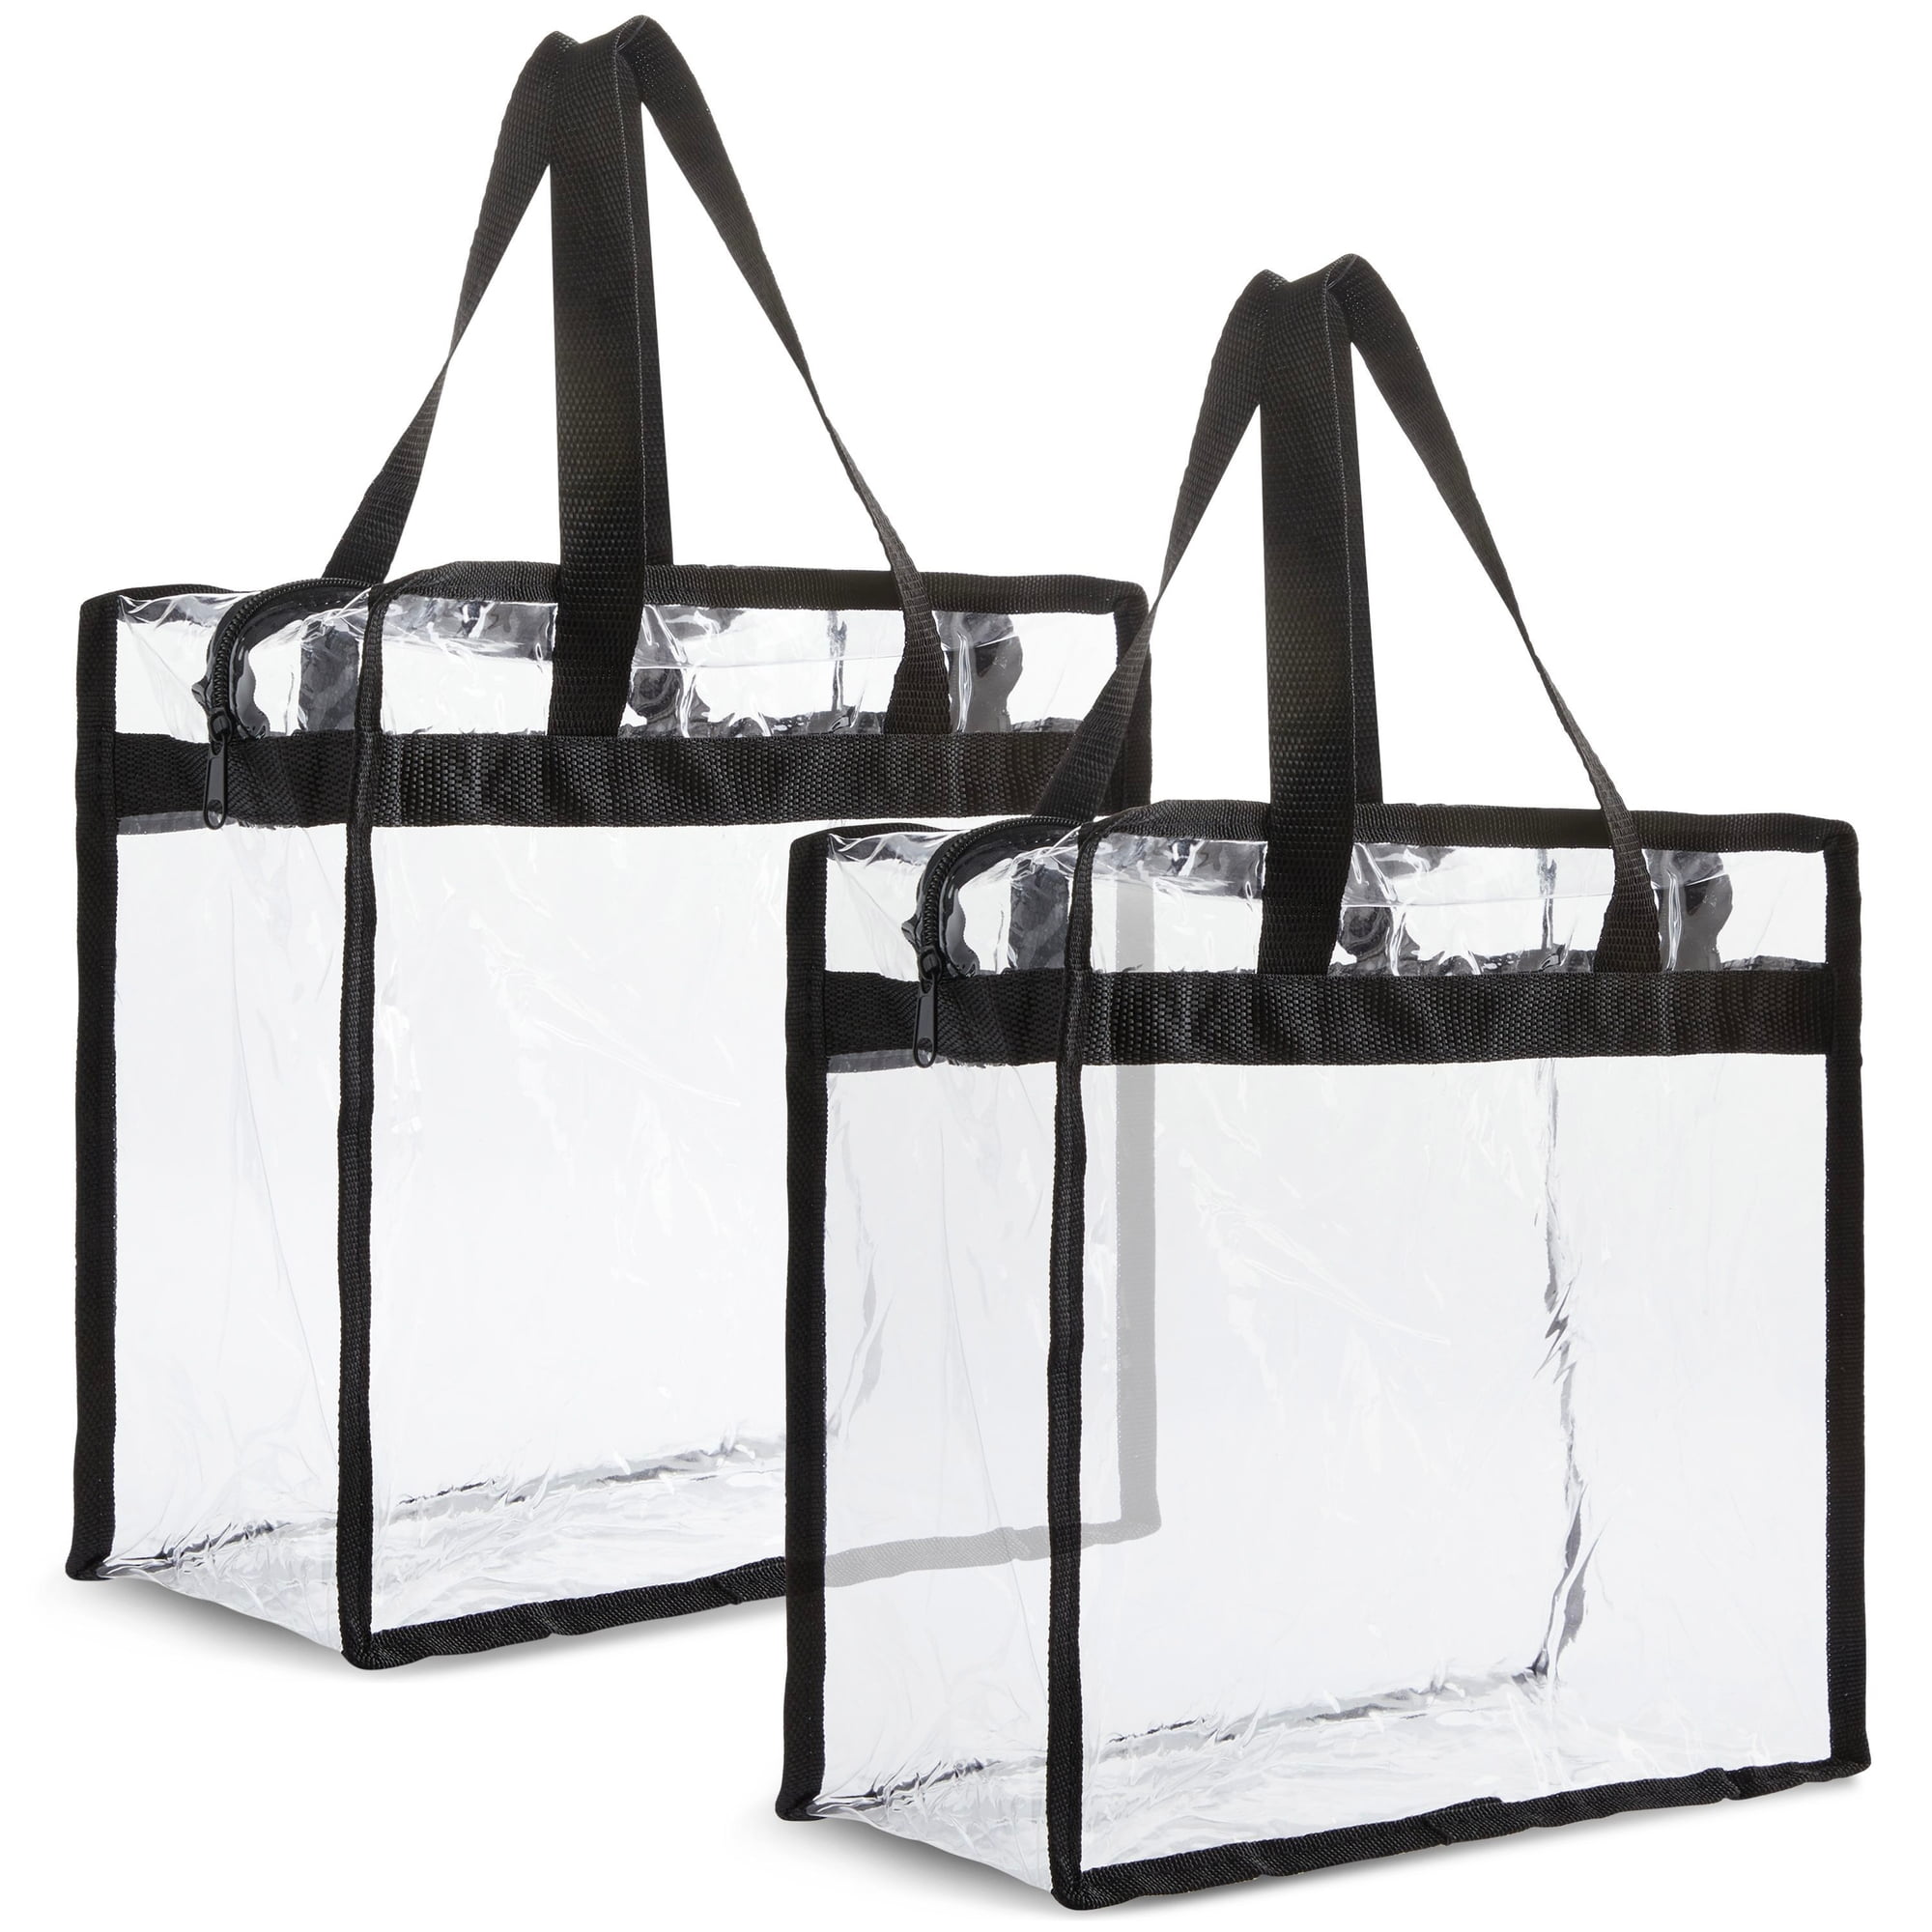  Clear Mini Backpack Stadium Approved 12x12x6 Small Transparent  Backpacks Plastic See Through Bag for Work Festival Security Travel